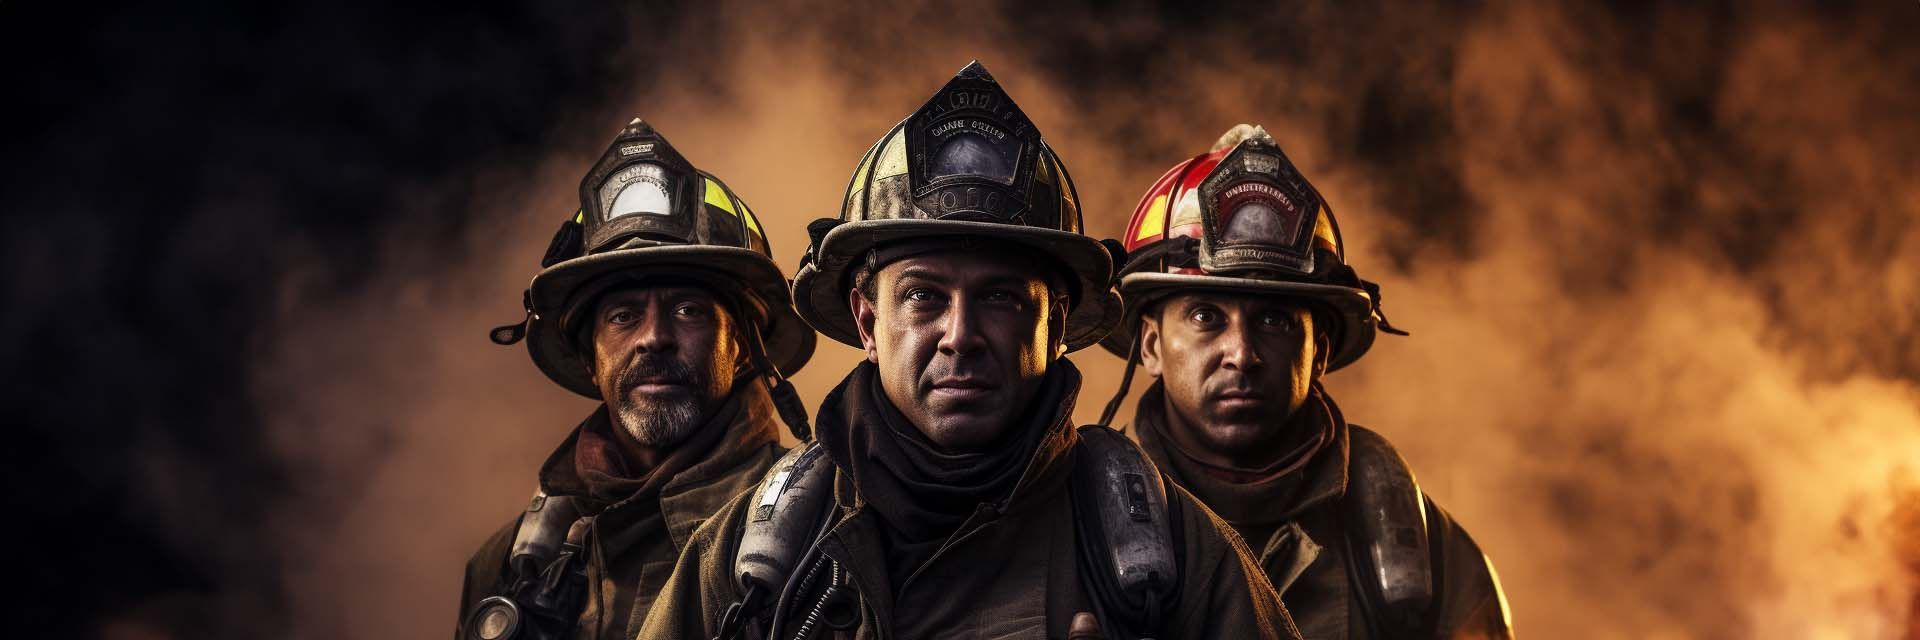 Image of Firefighters